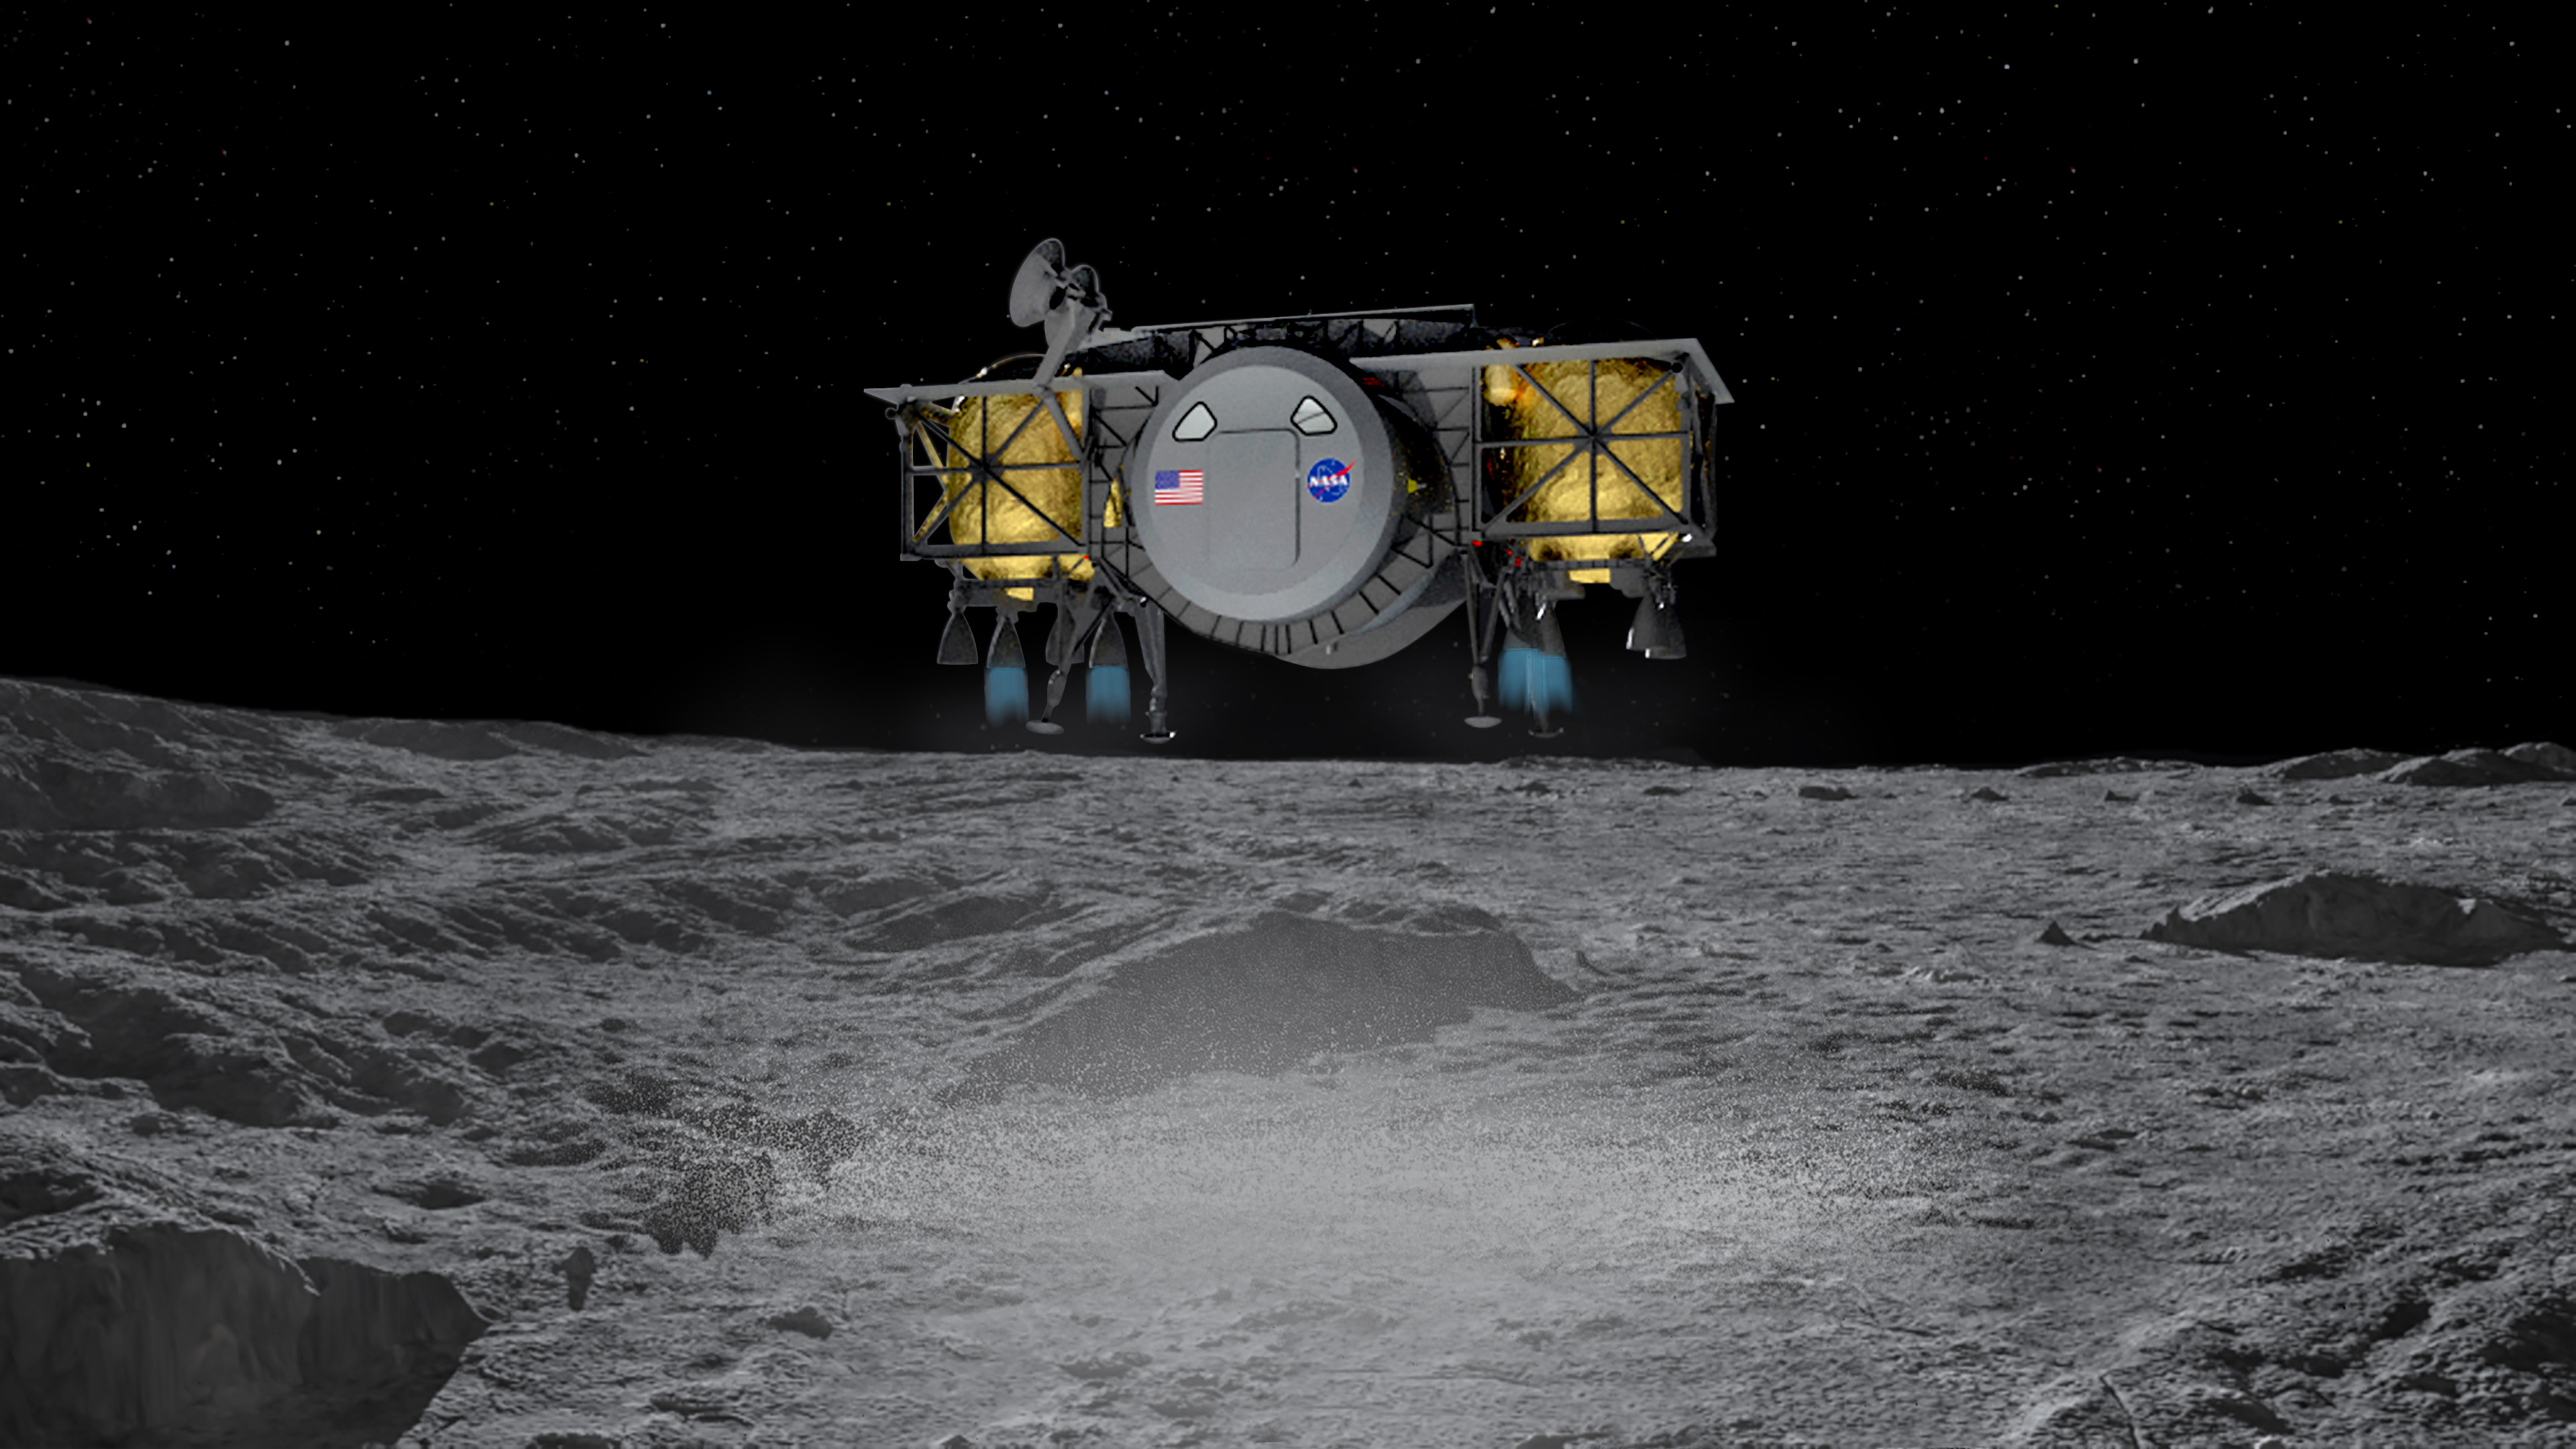 Human lander on the surface of the moon. Image via Dynetics.